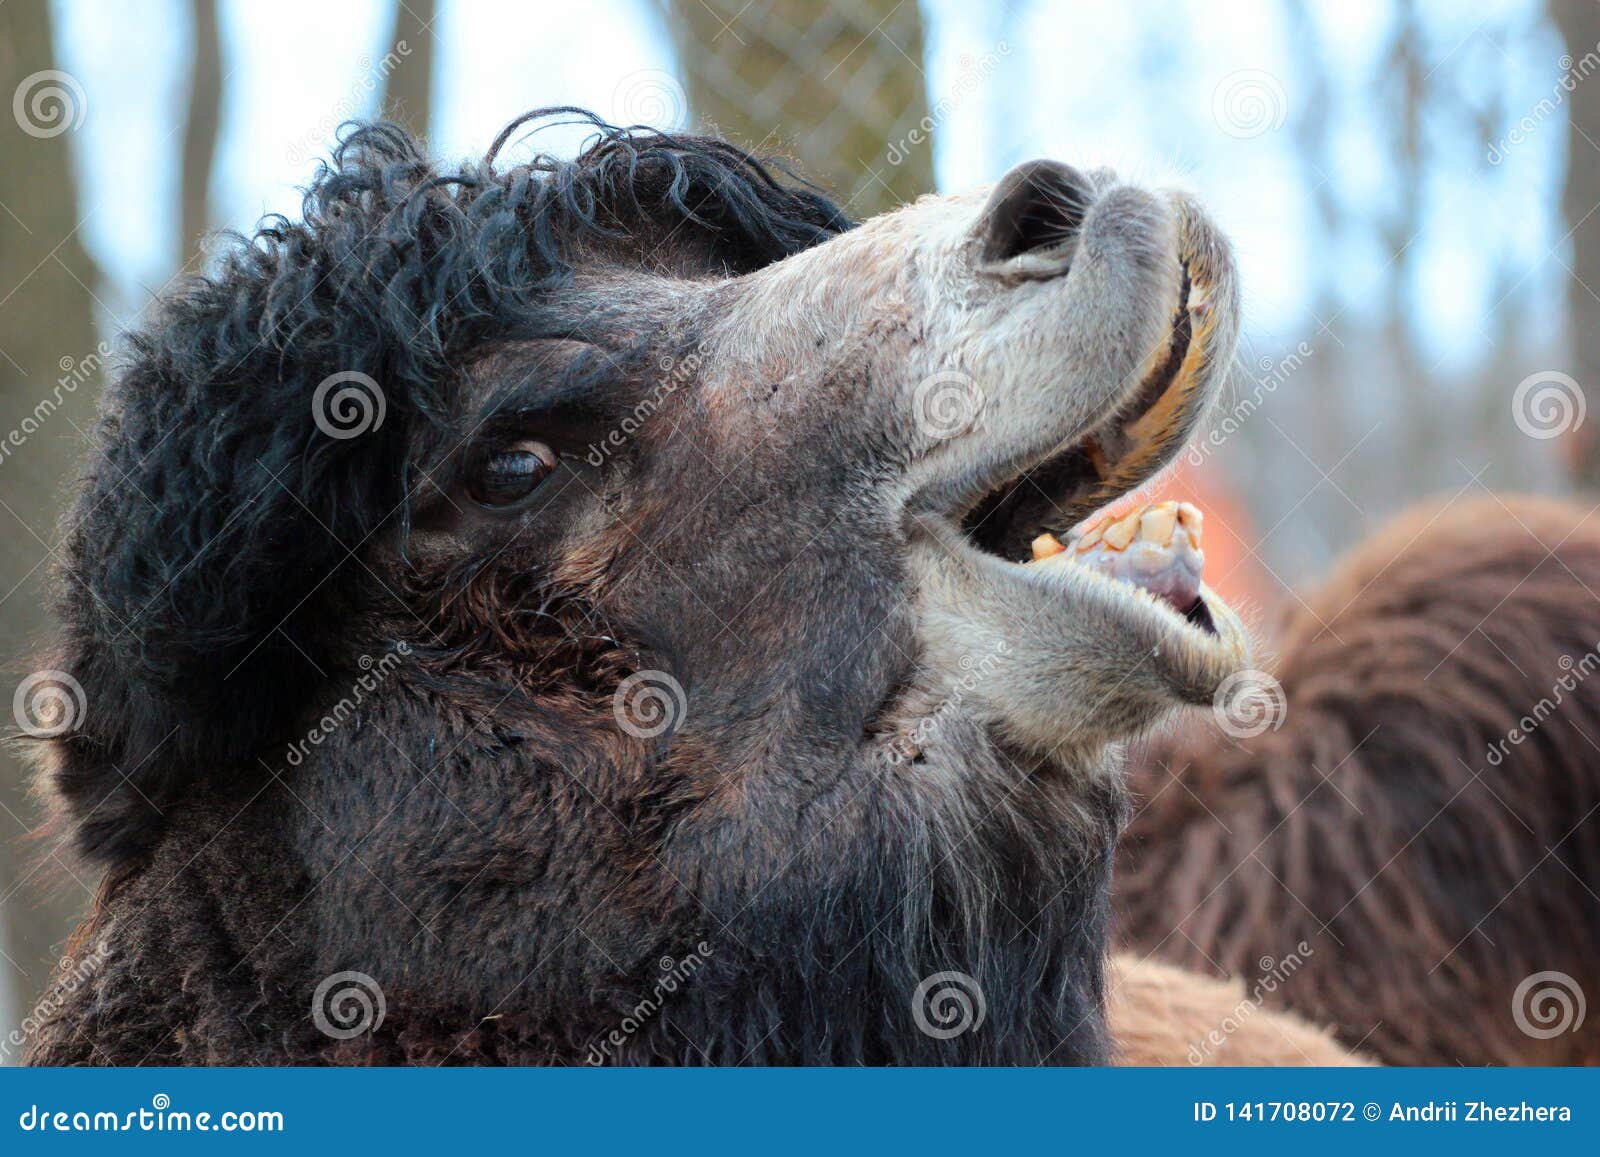 Camel Head Closeup. Camel Opening Its Mouth And Showing ...